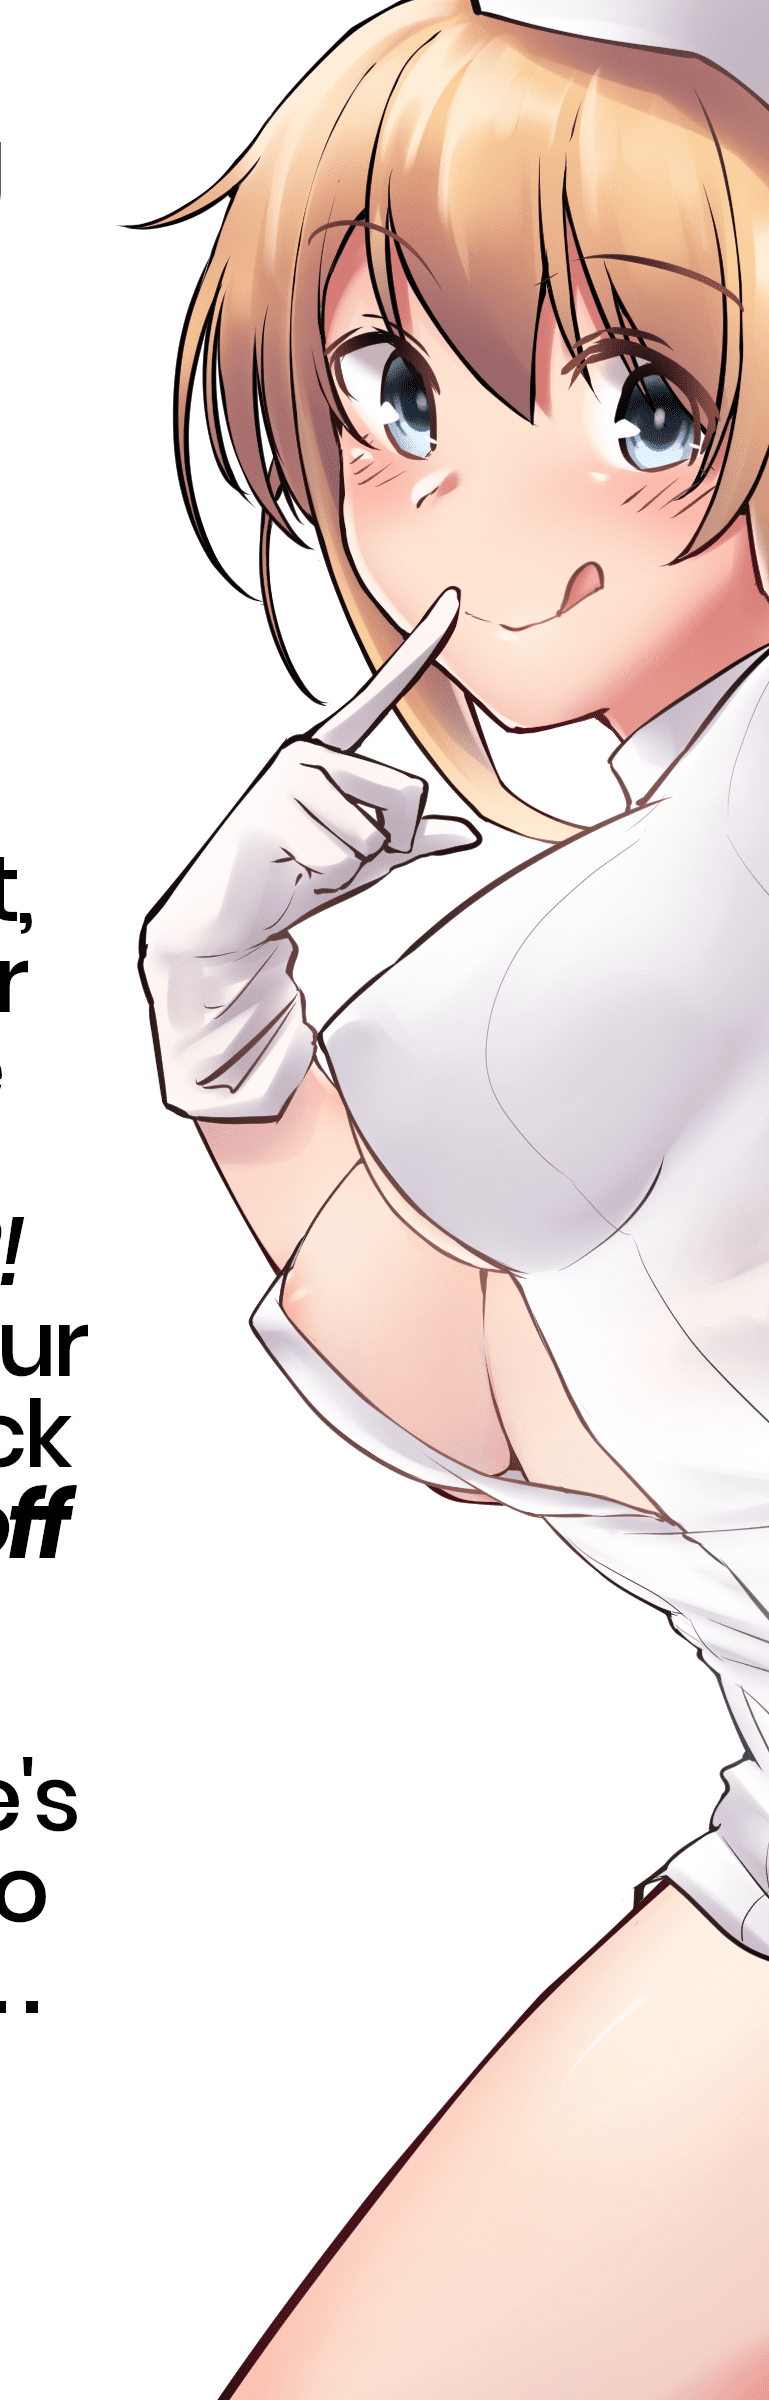 https://blackcockcult.com/wp-content/uploads/2019/06/hentai-captions-removing-whitebois-from-the-gene-pool-3-769x2400.png